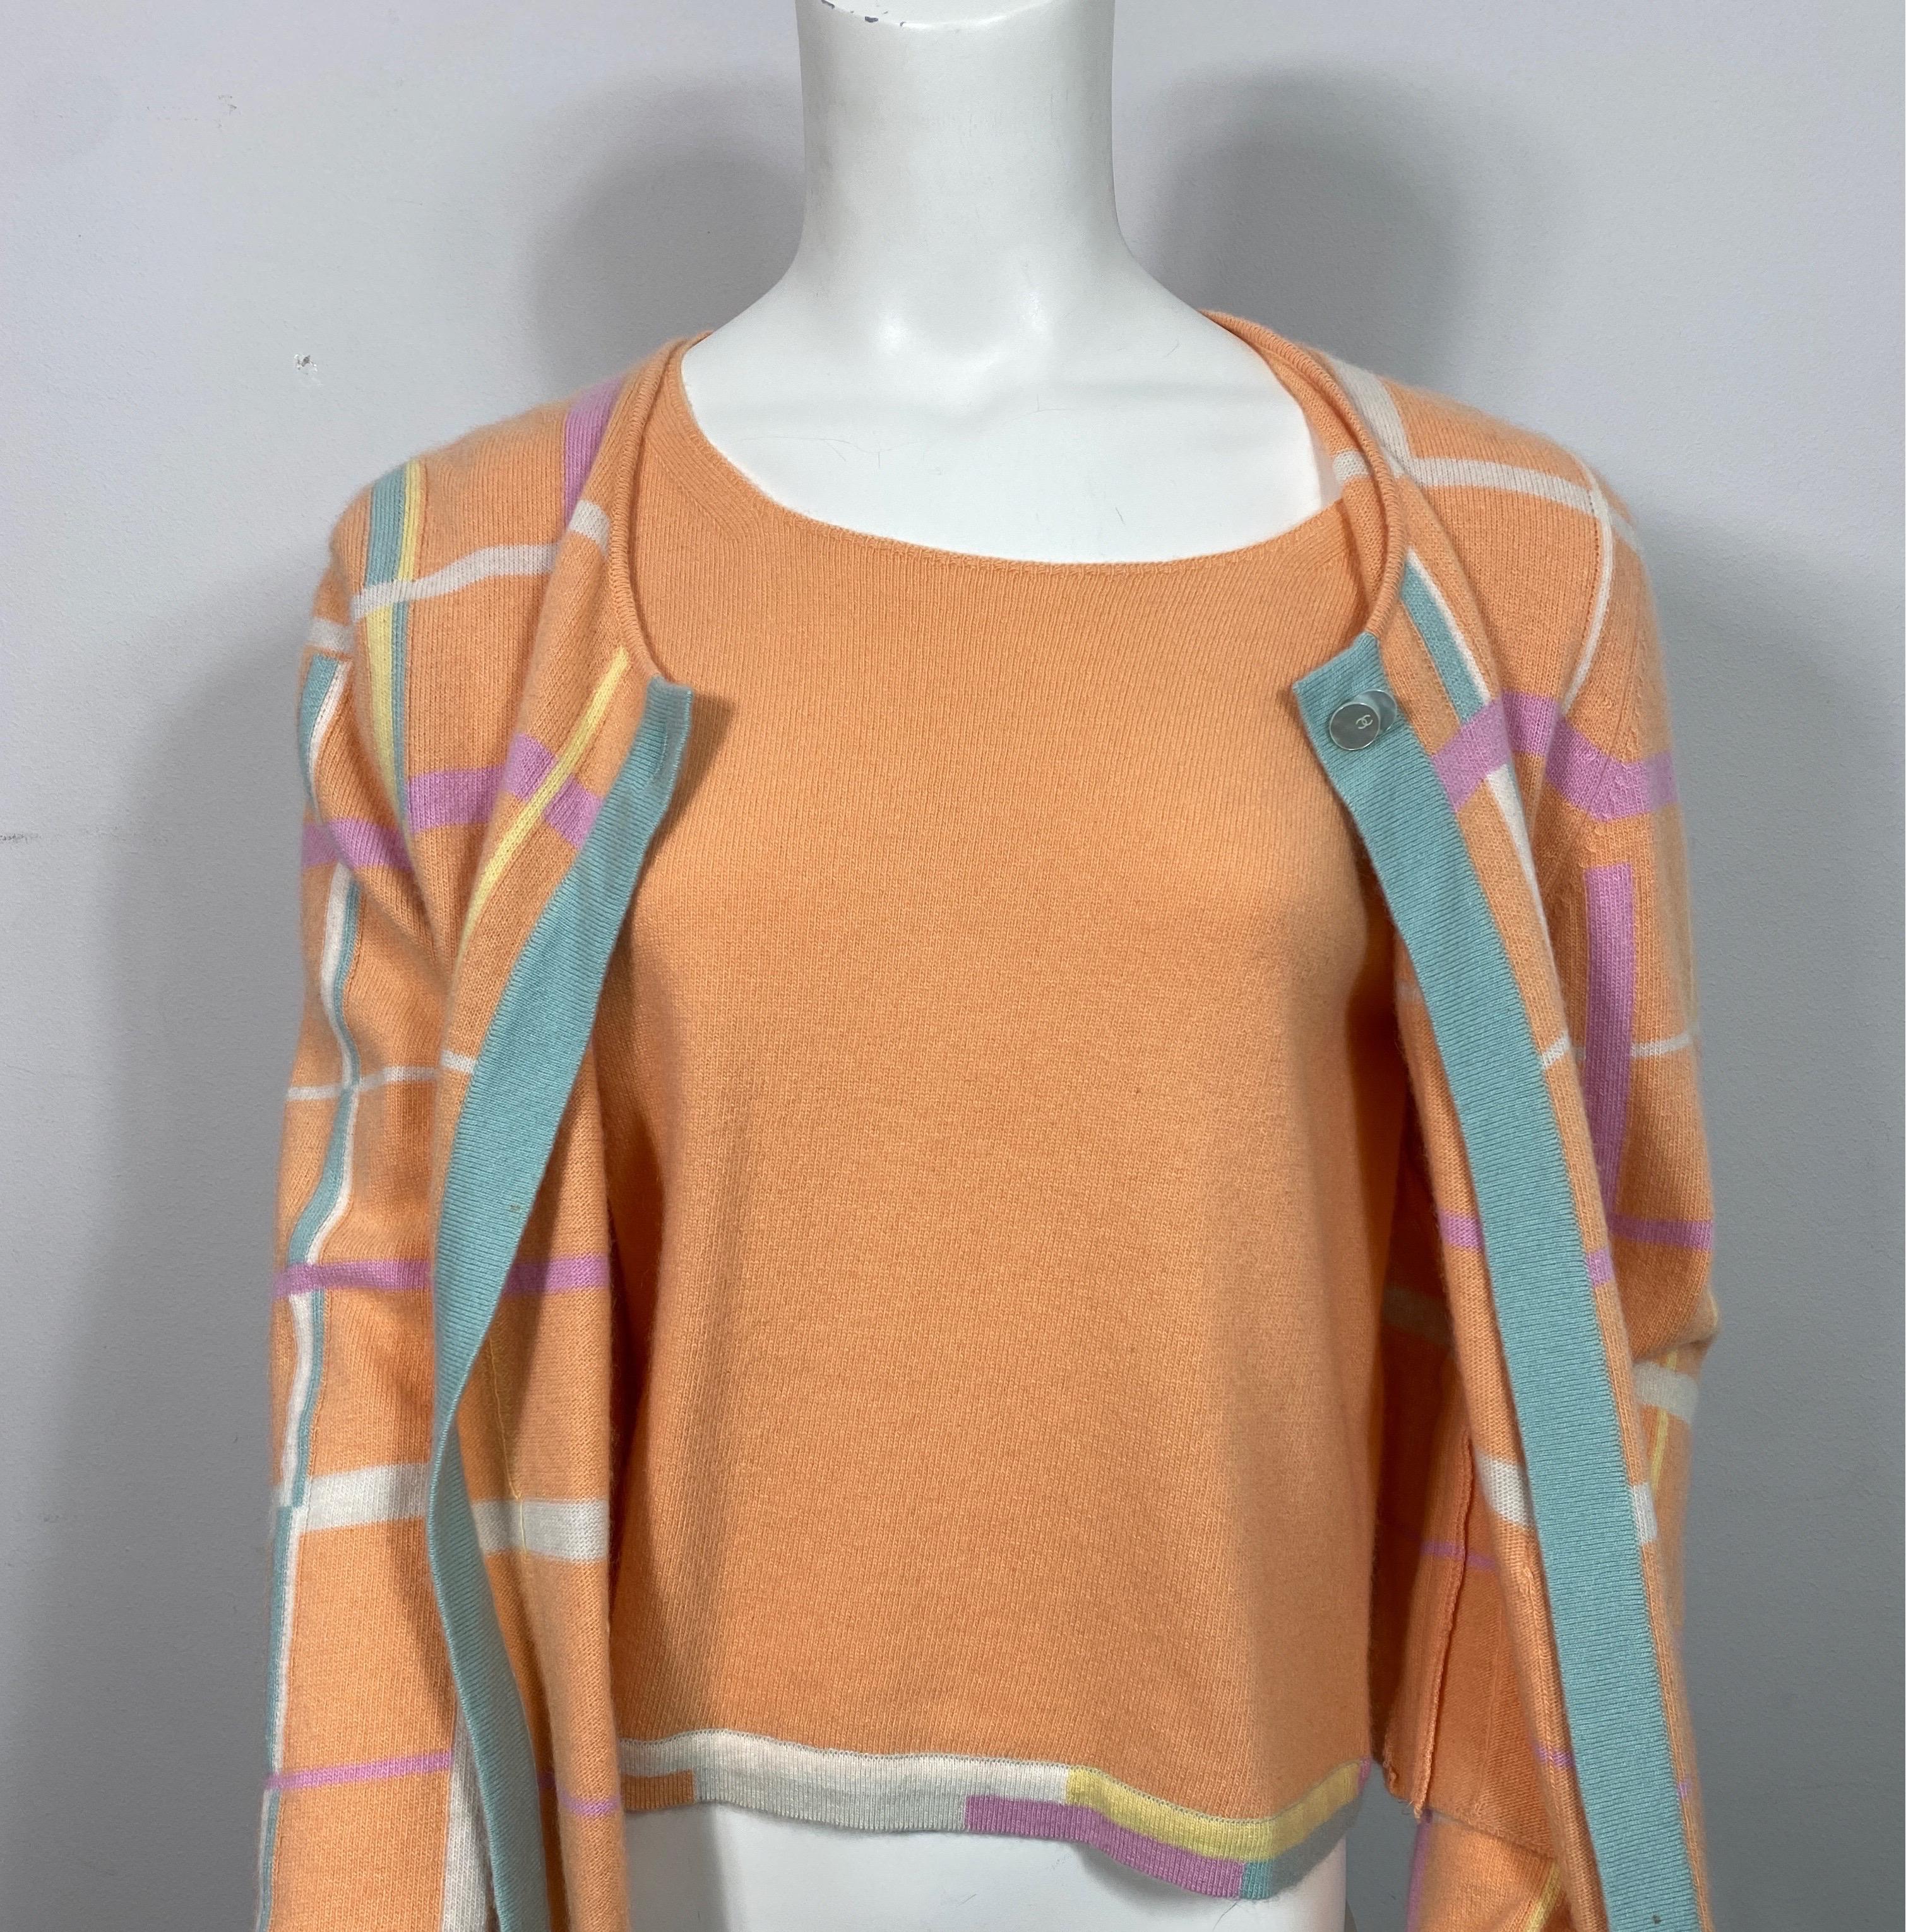 Chanel 1999 Cruise Collection Melon and Pastel Cashmere Sweater Set-Size 42 3